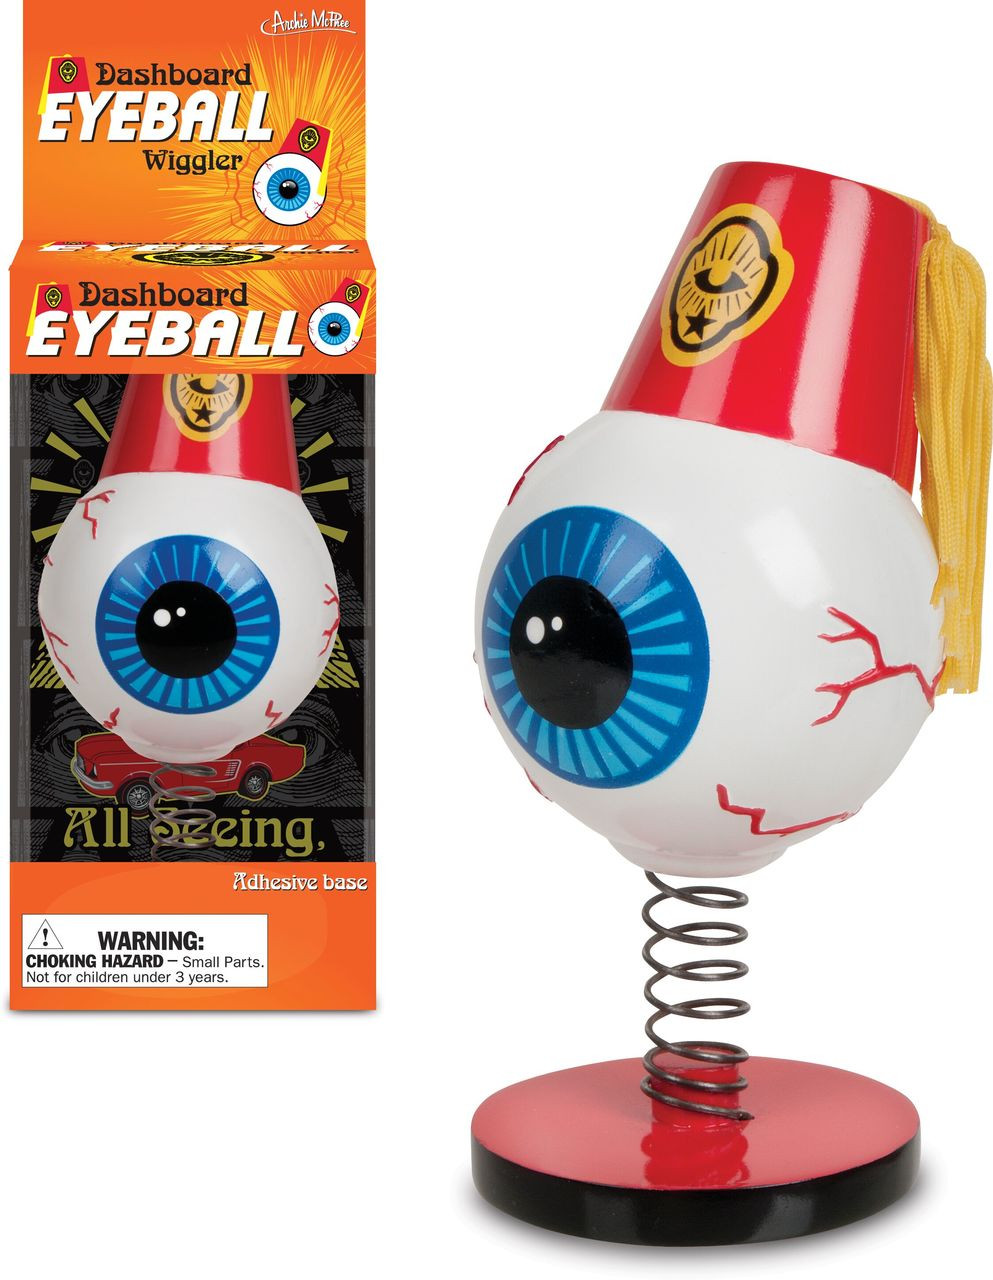 Accoutrements Big Googly Eyes - Big Googly Eyes . shop for Accoutrements  products in India.